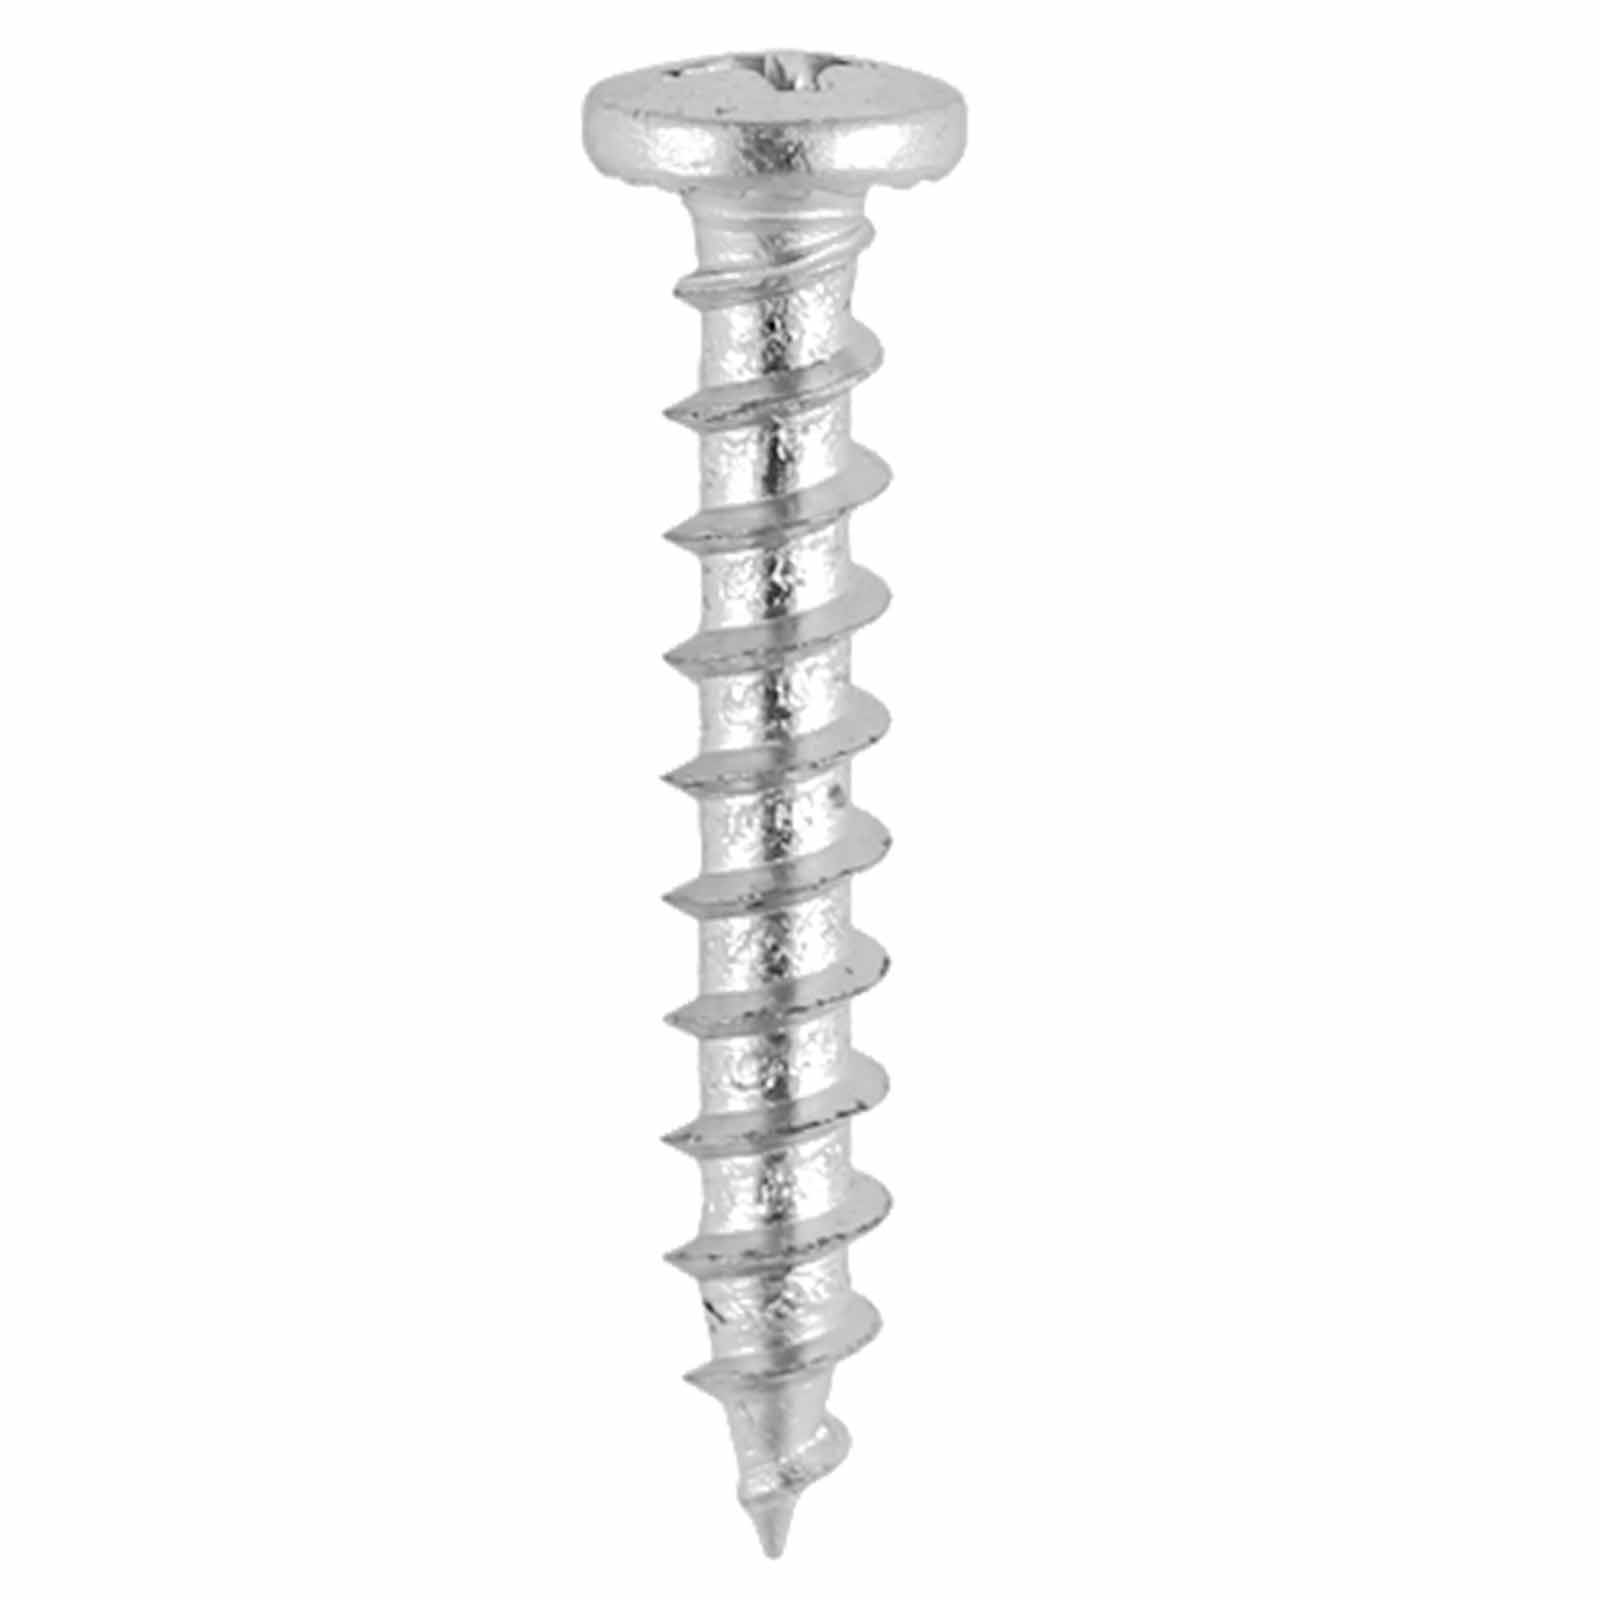 Photos - Nail / Screw / Fastener TIMCO Pvc Window Screws Shallow Pan Stainless 4.8mm 16mm Pack of 1000 215SS 